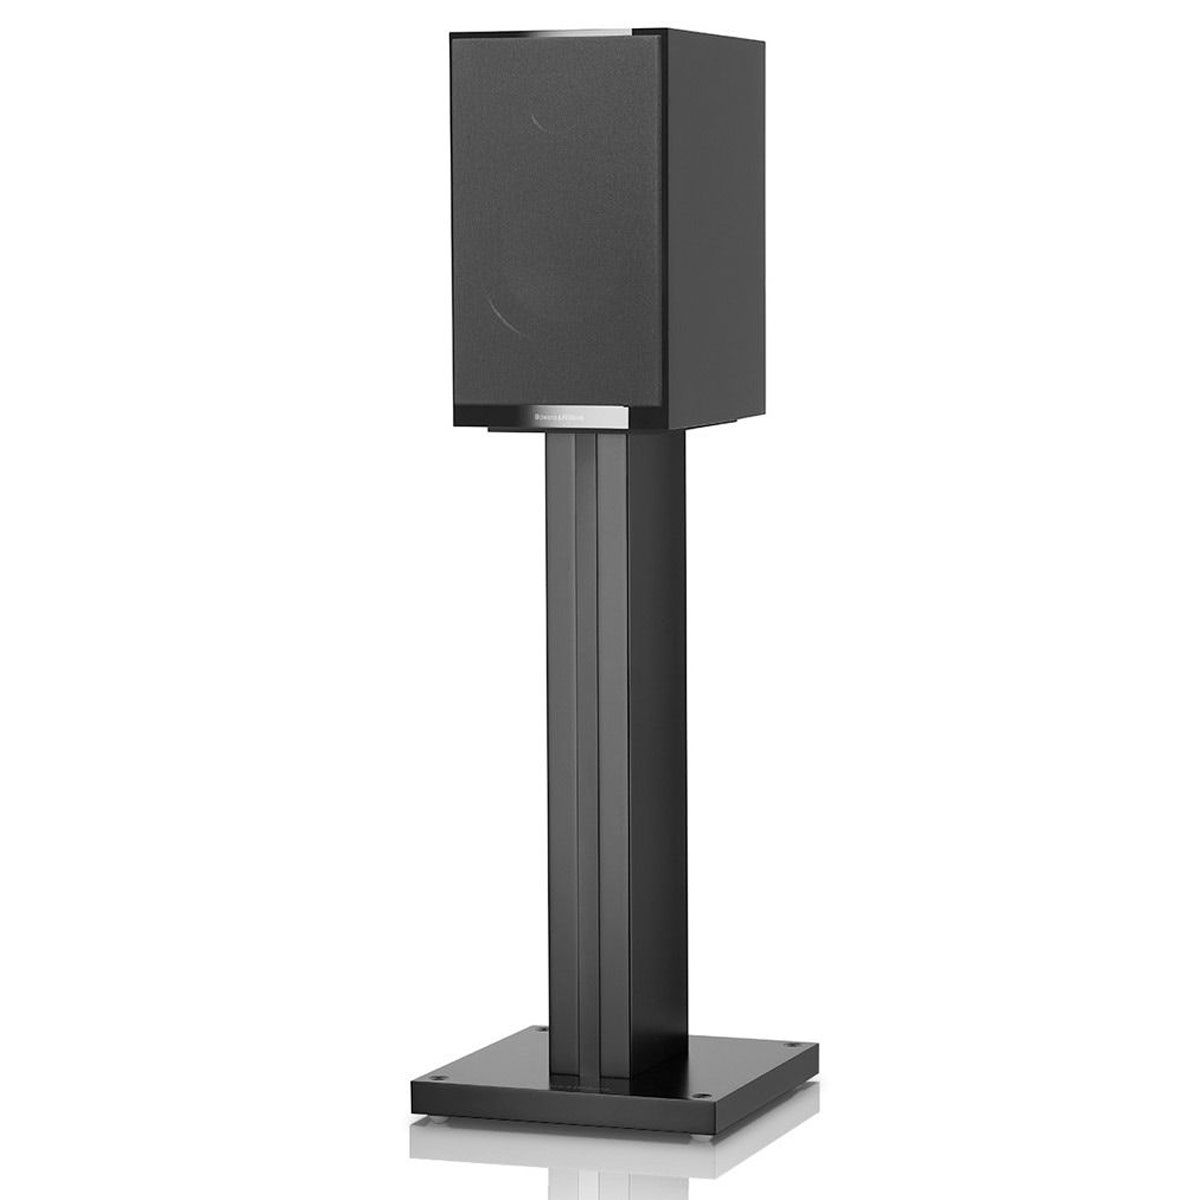 Bowers & Wilkins 706 S2 Standmount Speaker - Gloss Black with grille - Front Angled View